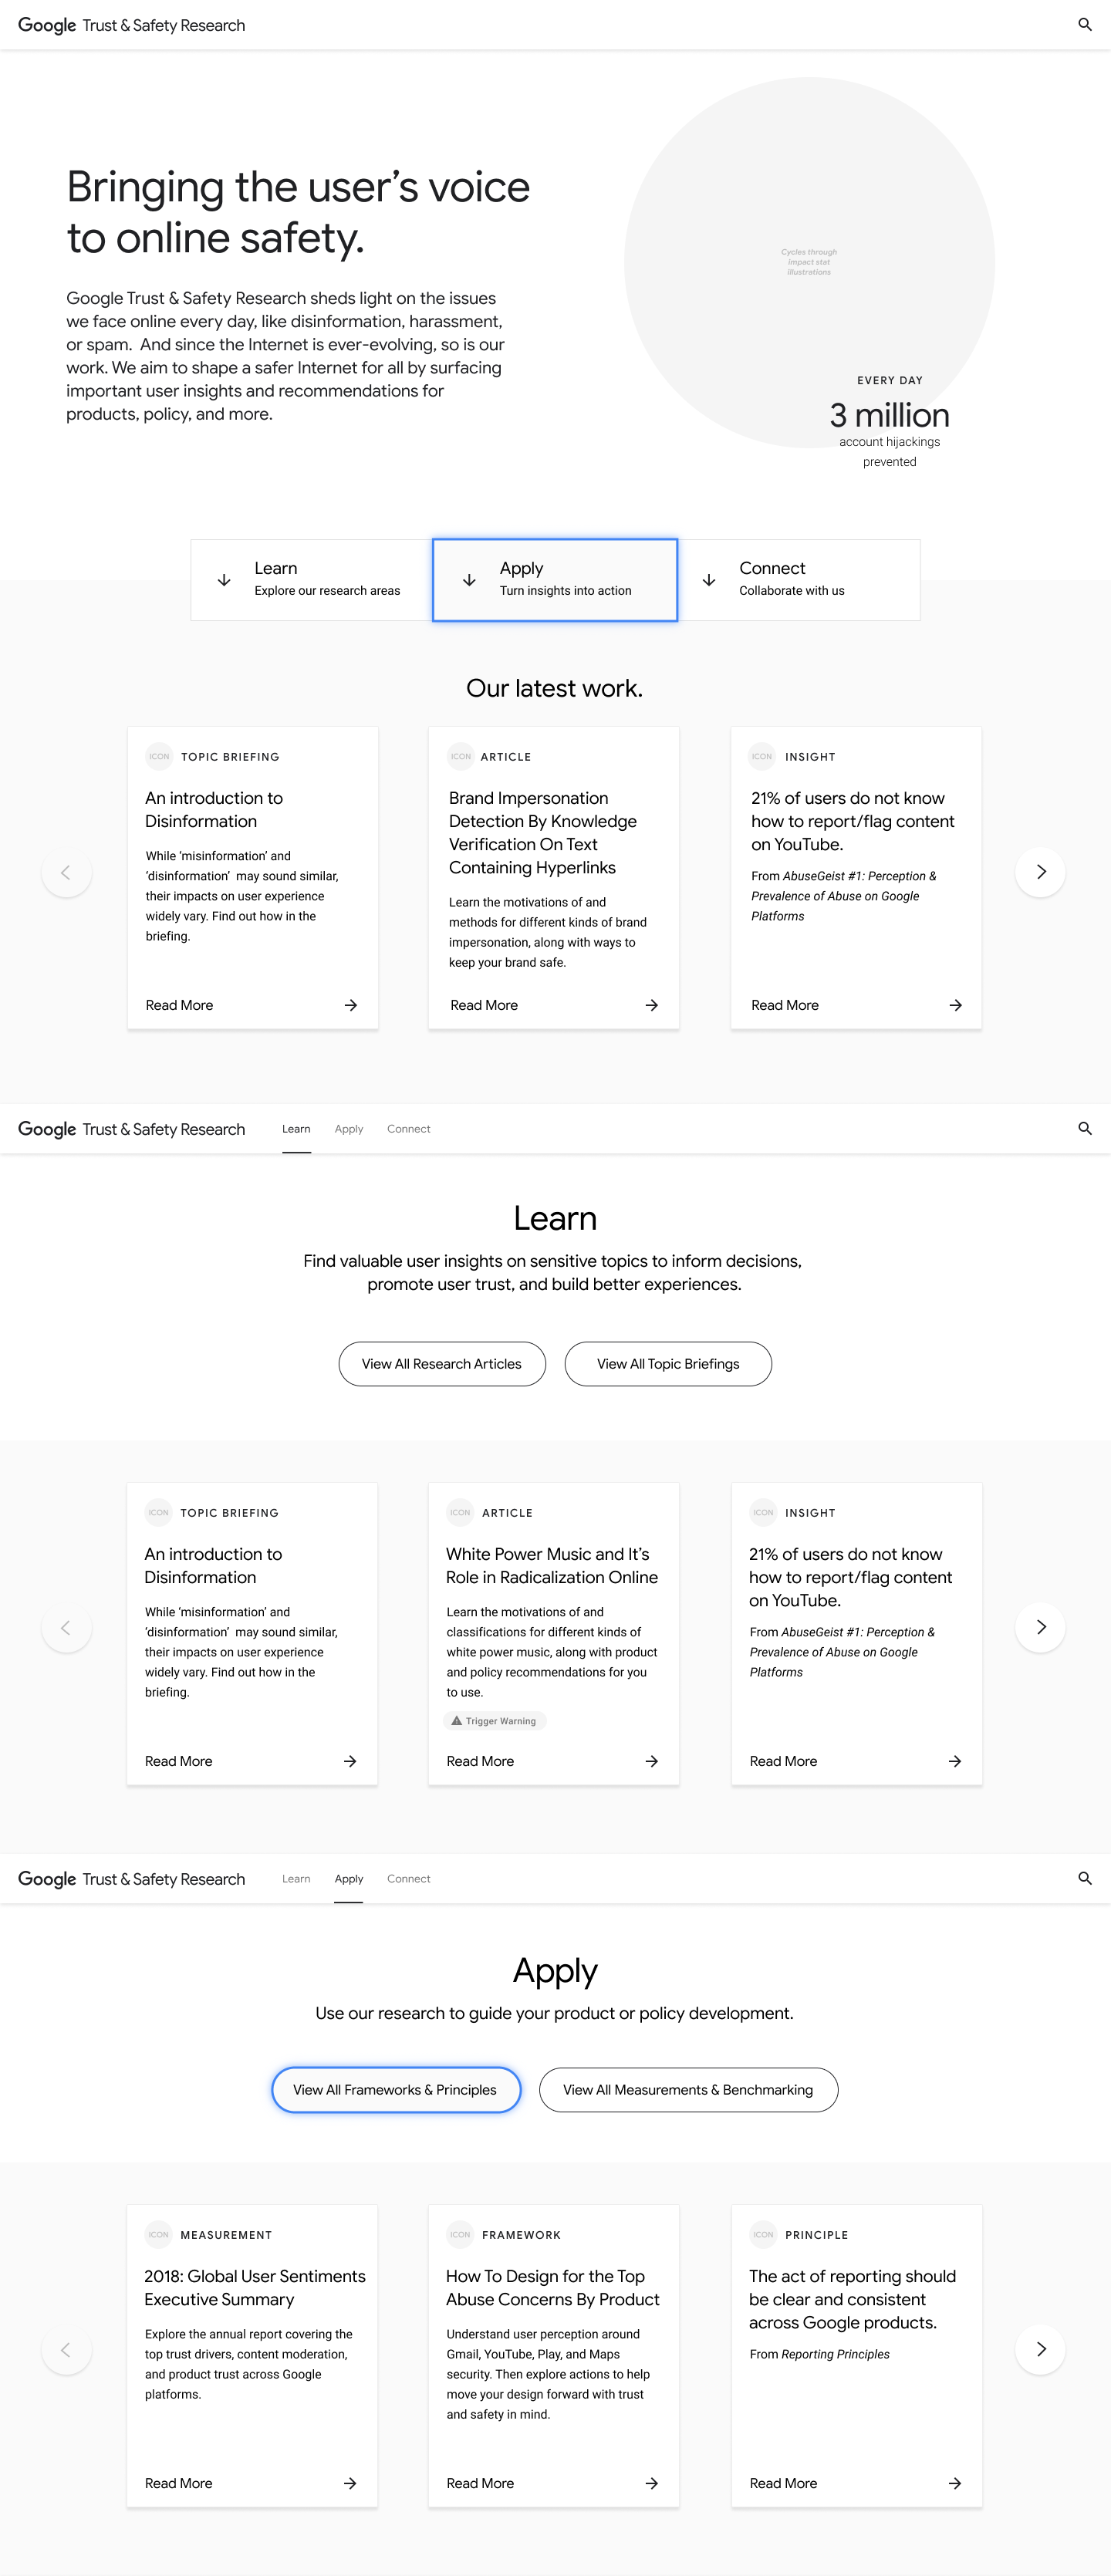 Landing Page with 'Apply' and 'View All Frameworks & Principles' buttons highlighted.